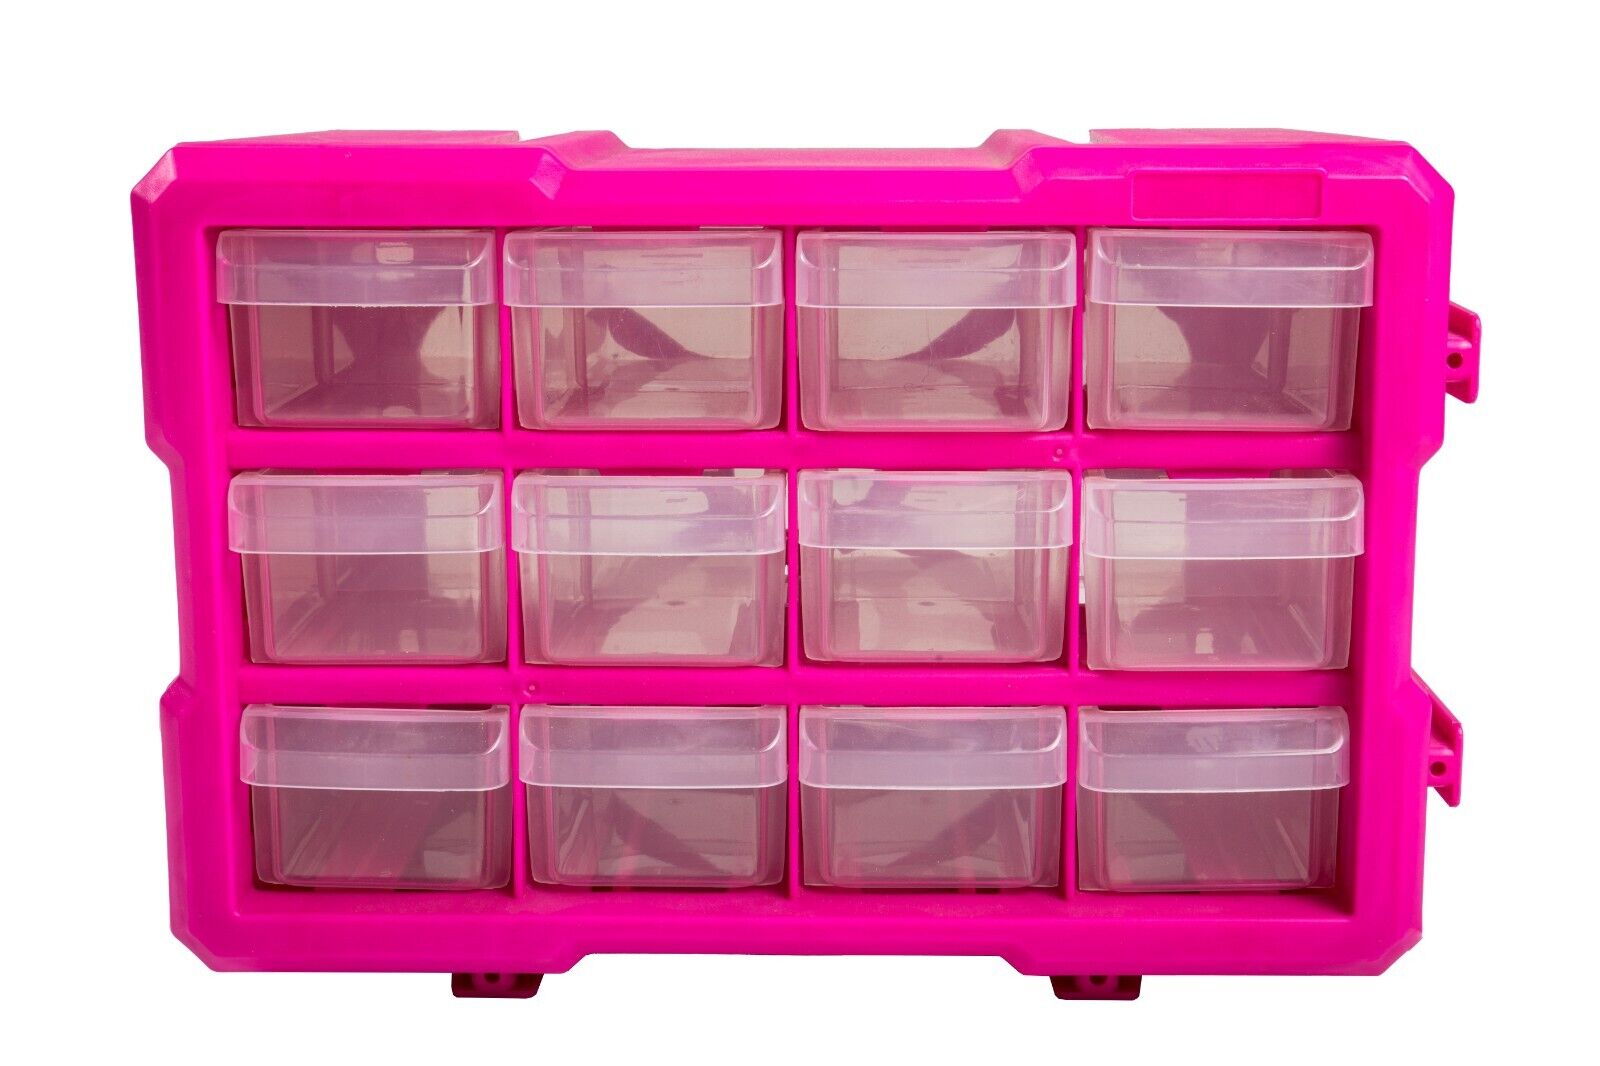 PINK 12-Drawer Parts Bin Wall Mounted or Flat surface buy multiple to combine